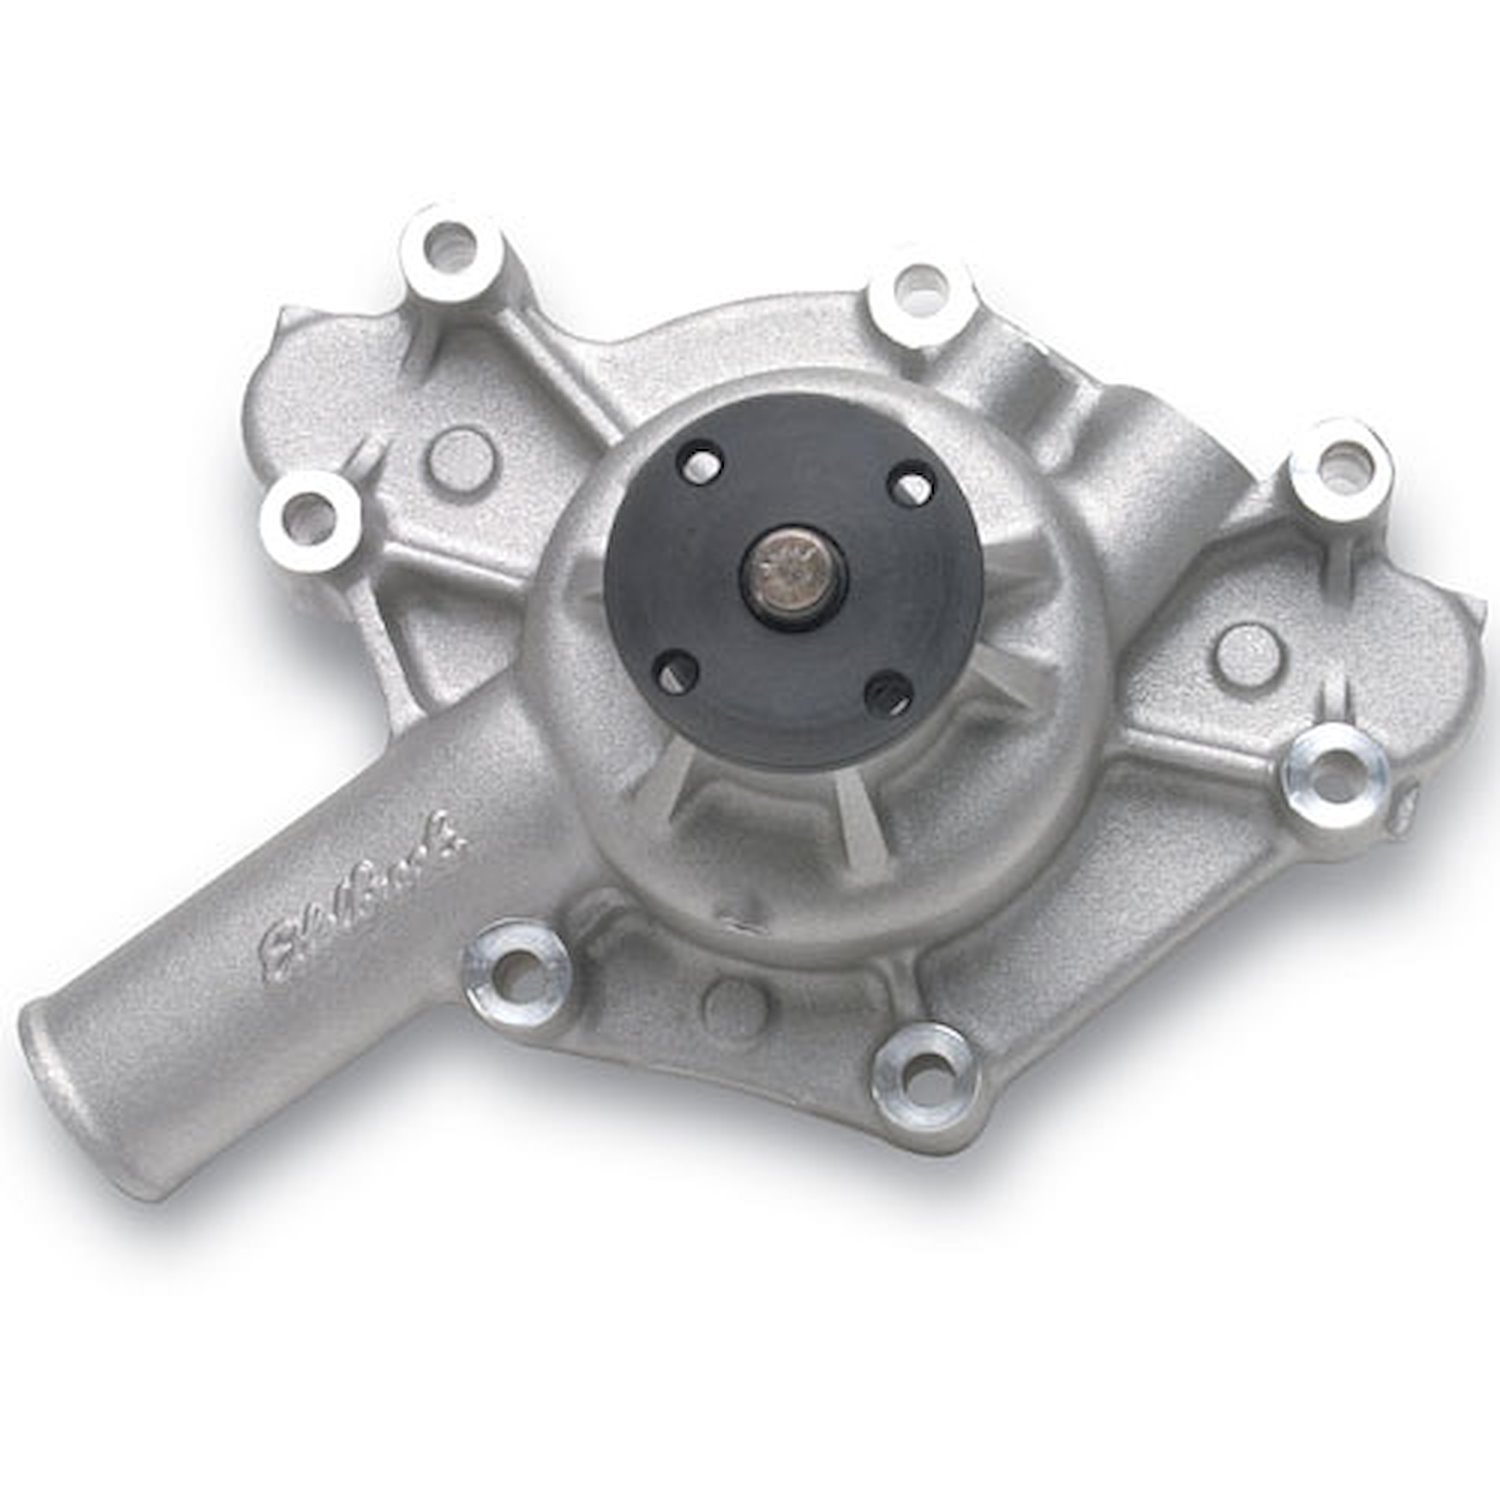 Victor Series Satin Aluminum Water Pump for 1969-1985 Small Block Chysler 318-360